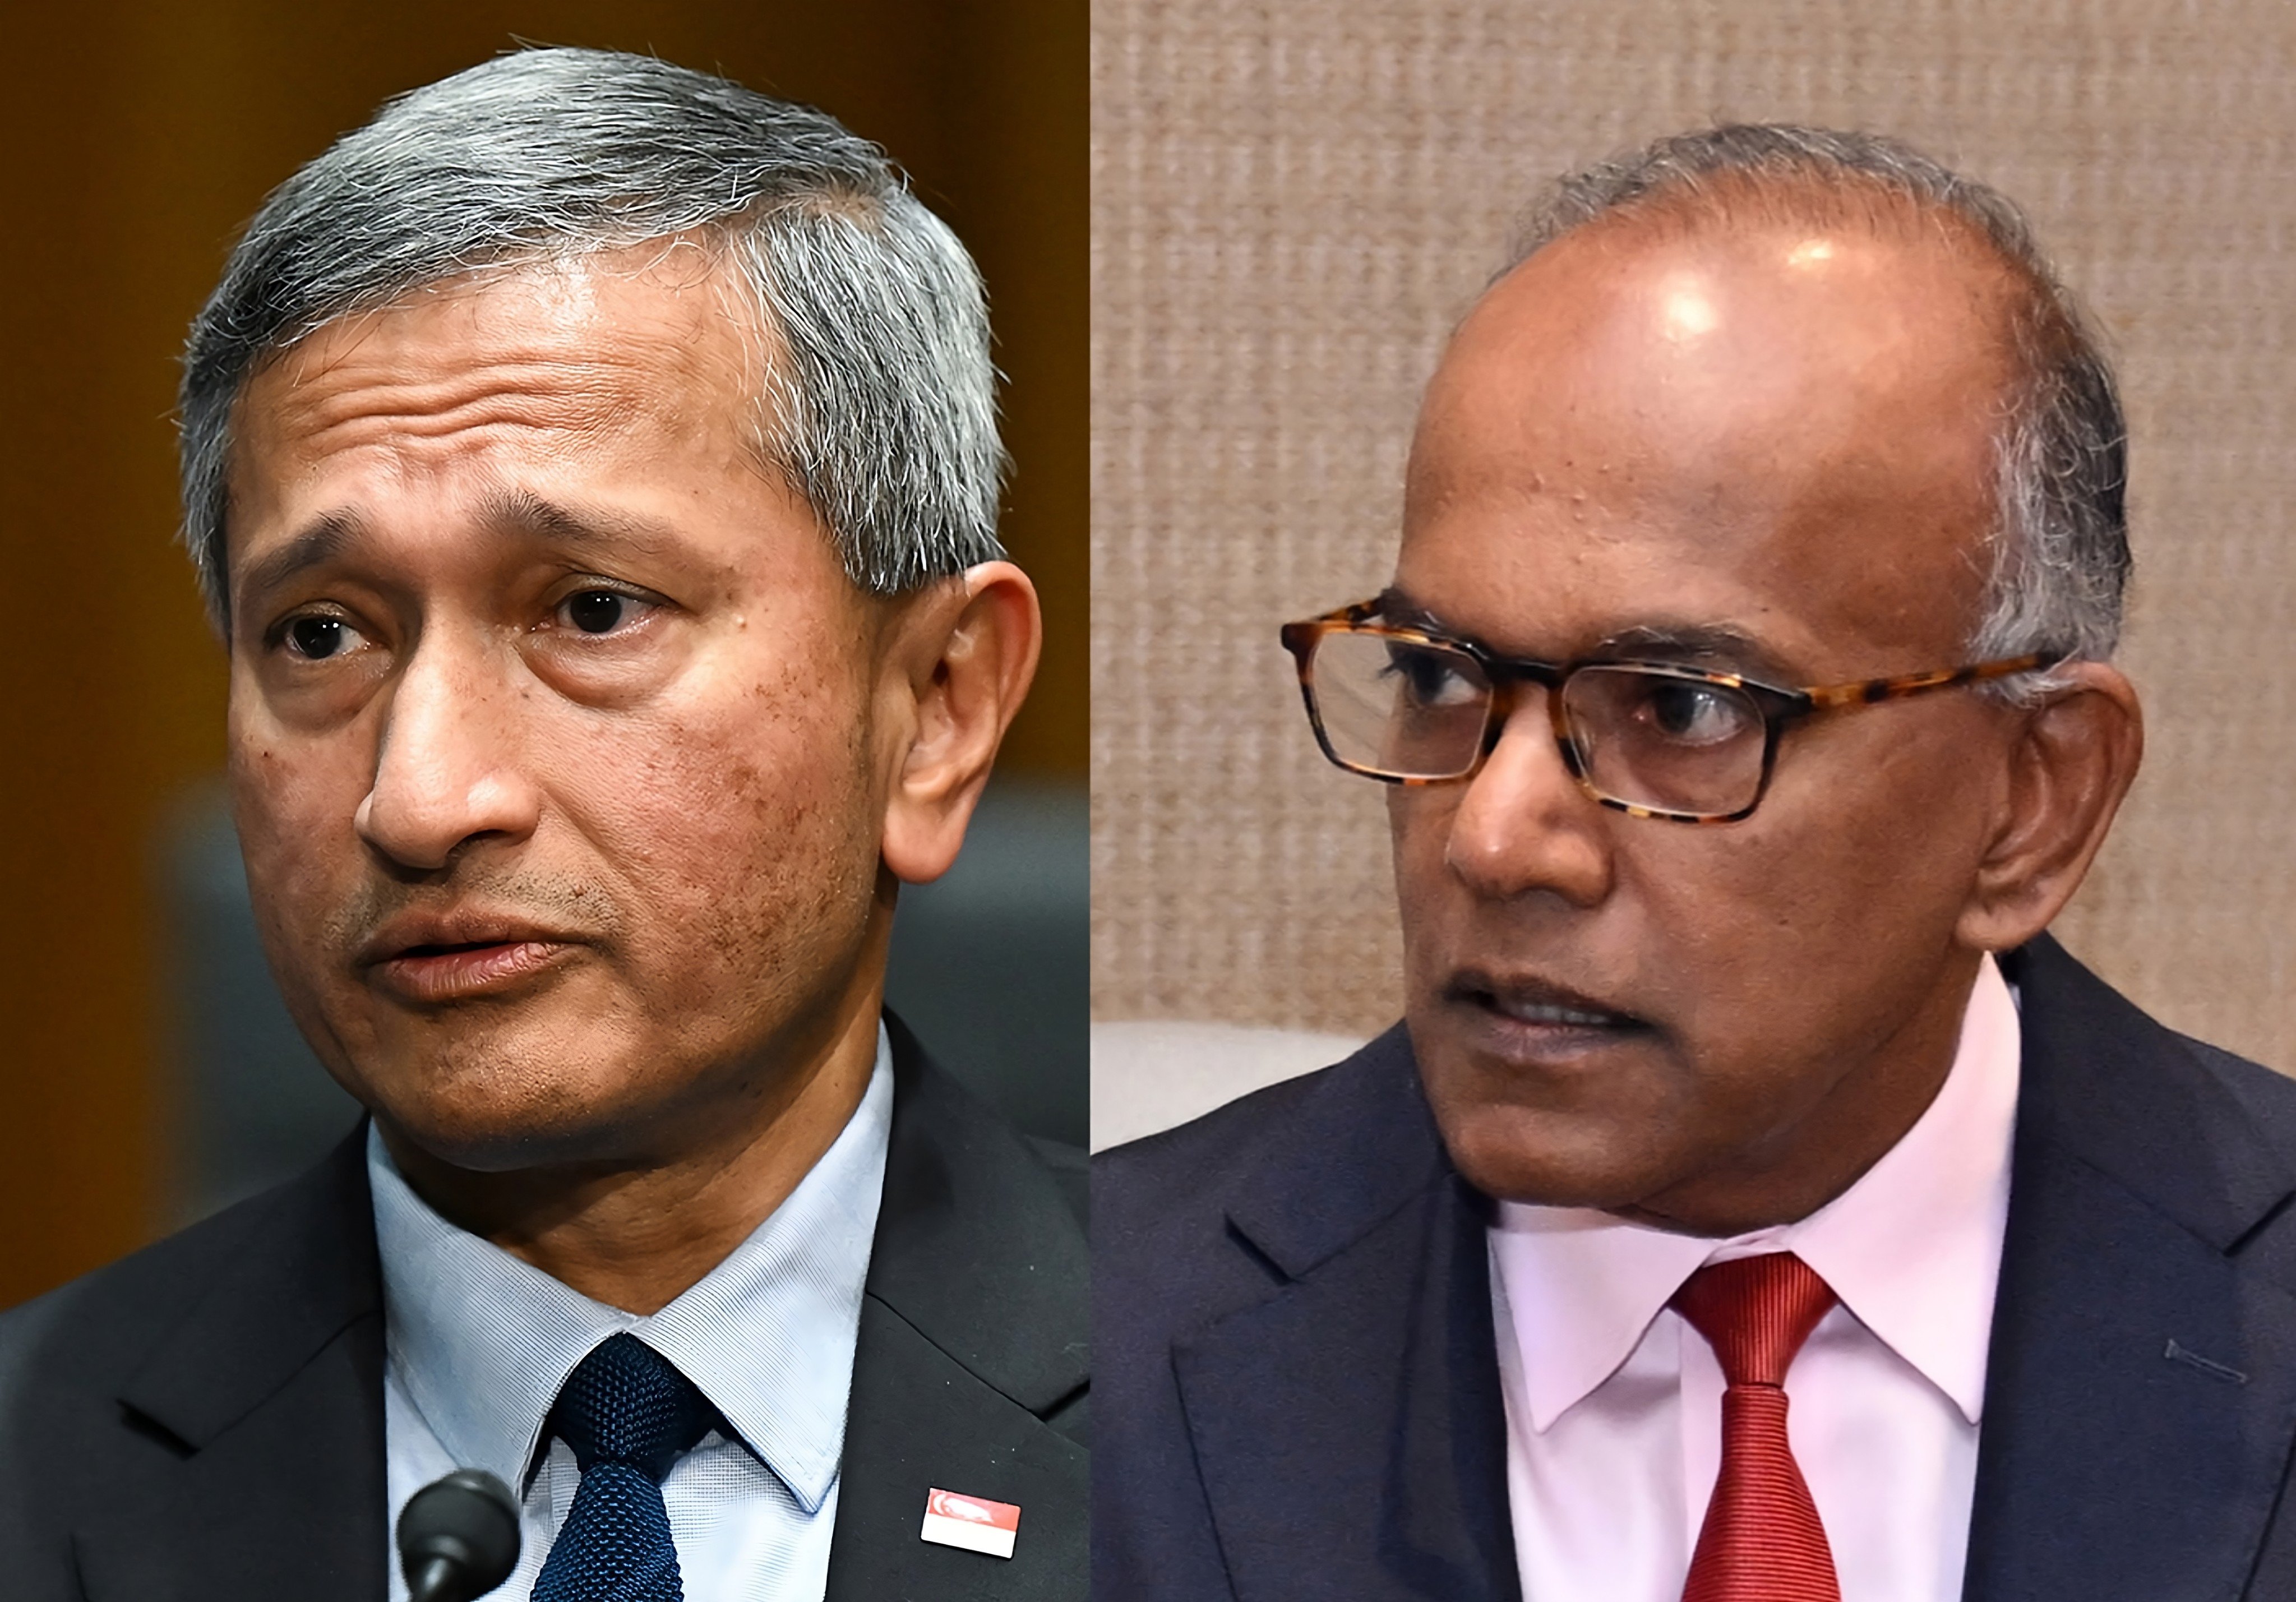 Singapore’s Foreign Minister Vivian Balakrishnan (left) and Law Minister K Shanmugam are seen in this composite picture. Photo: dpa, SCMP